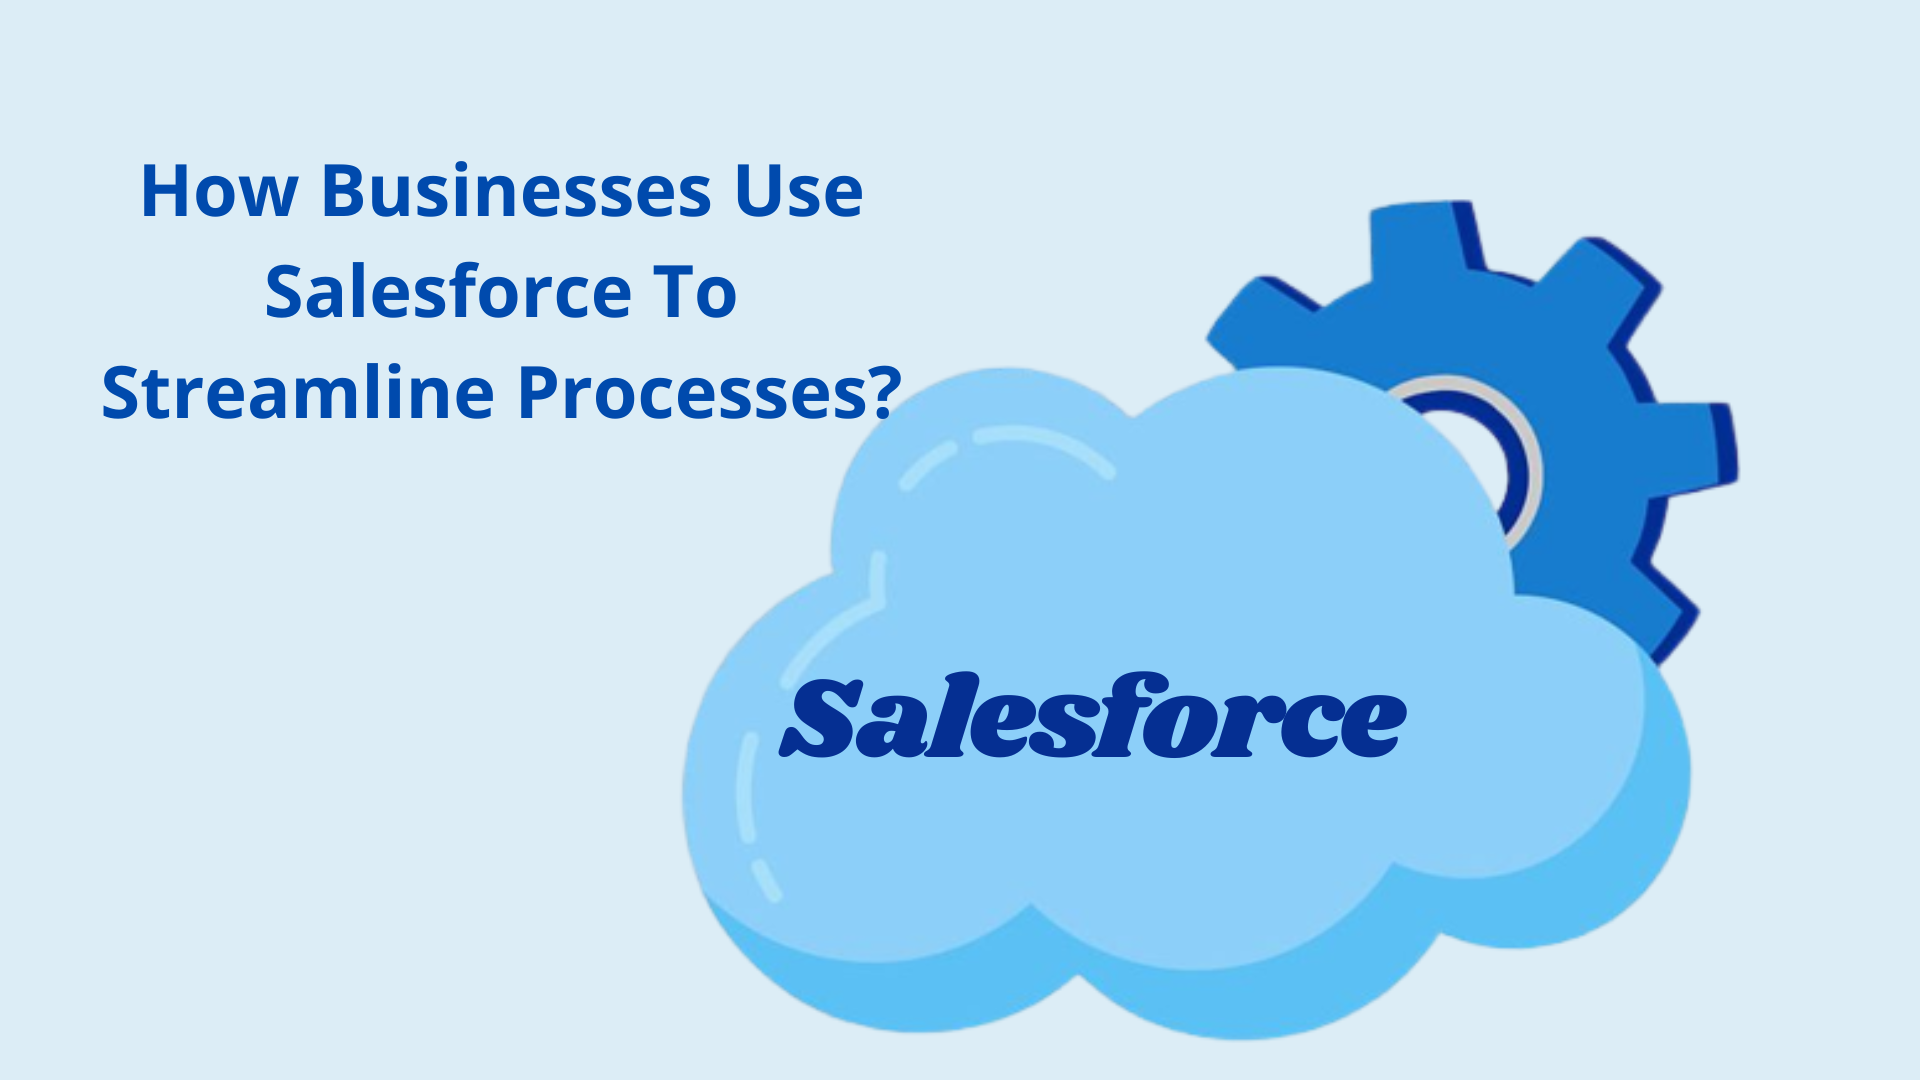 How Businesses Use Salesforce To Streamline Processes-4cc16395